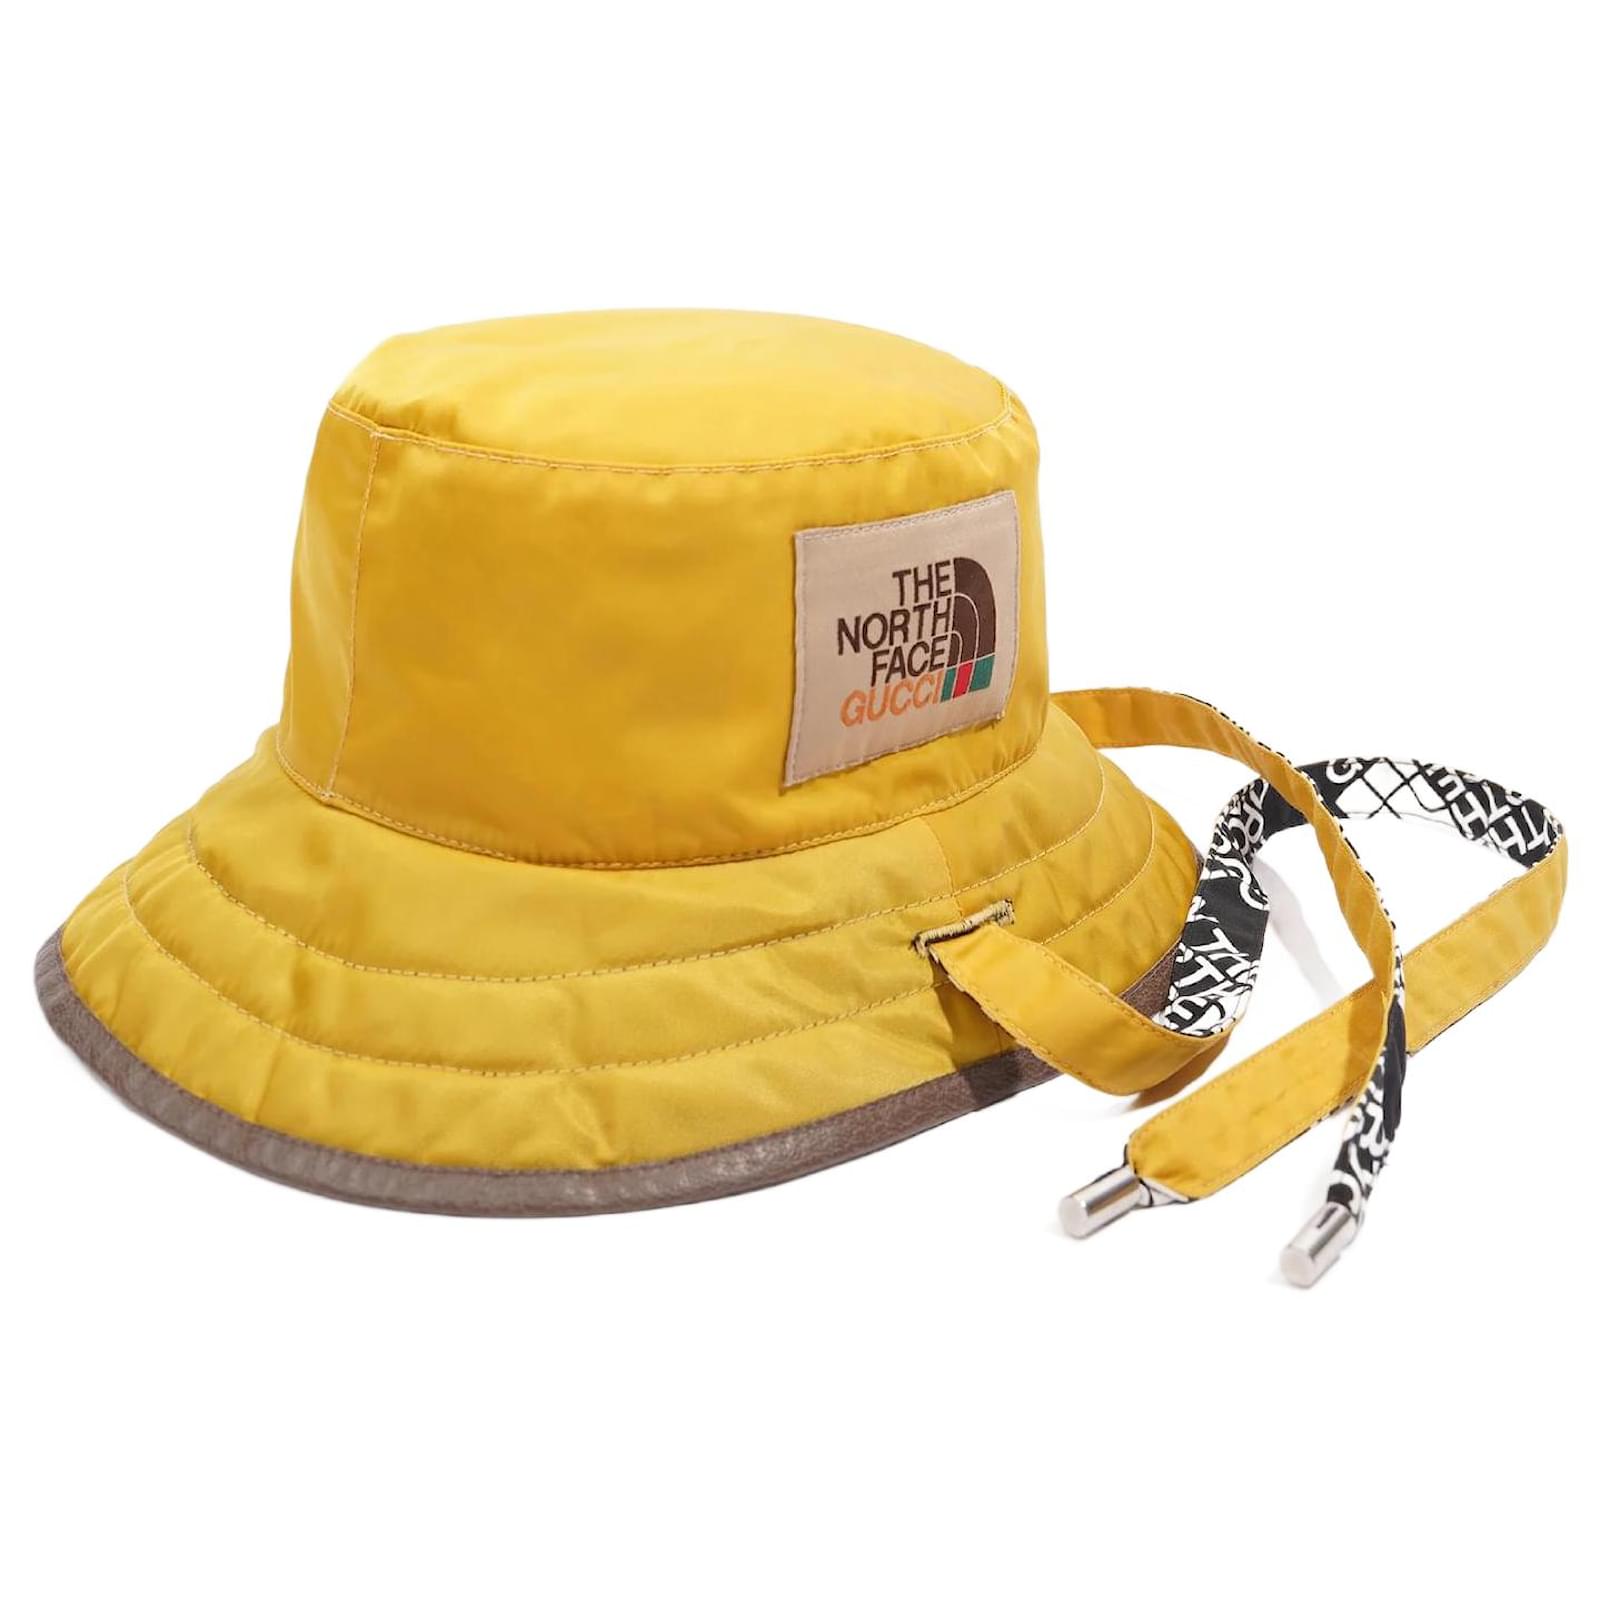 Gucci The North Face Reversible Bucket Hat Black / Yellow Nylon